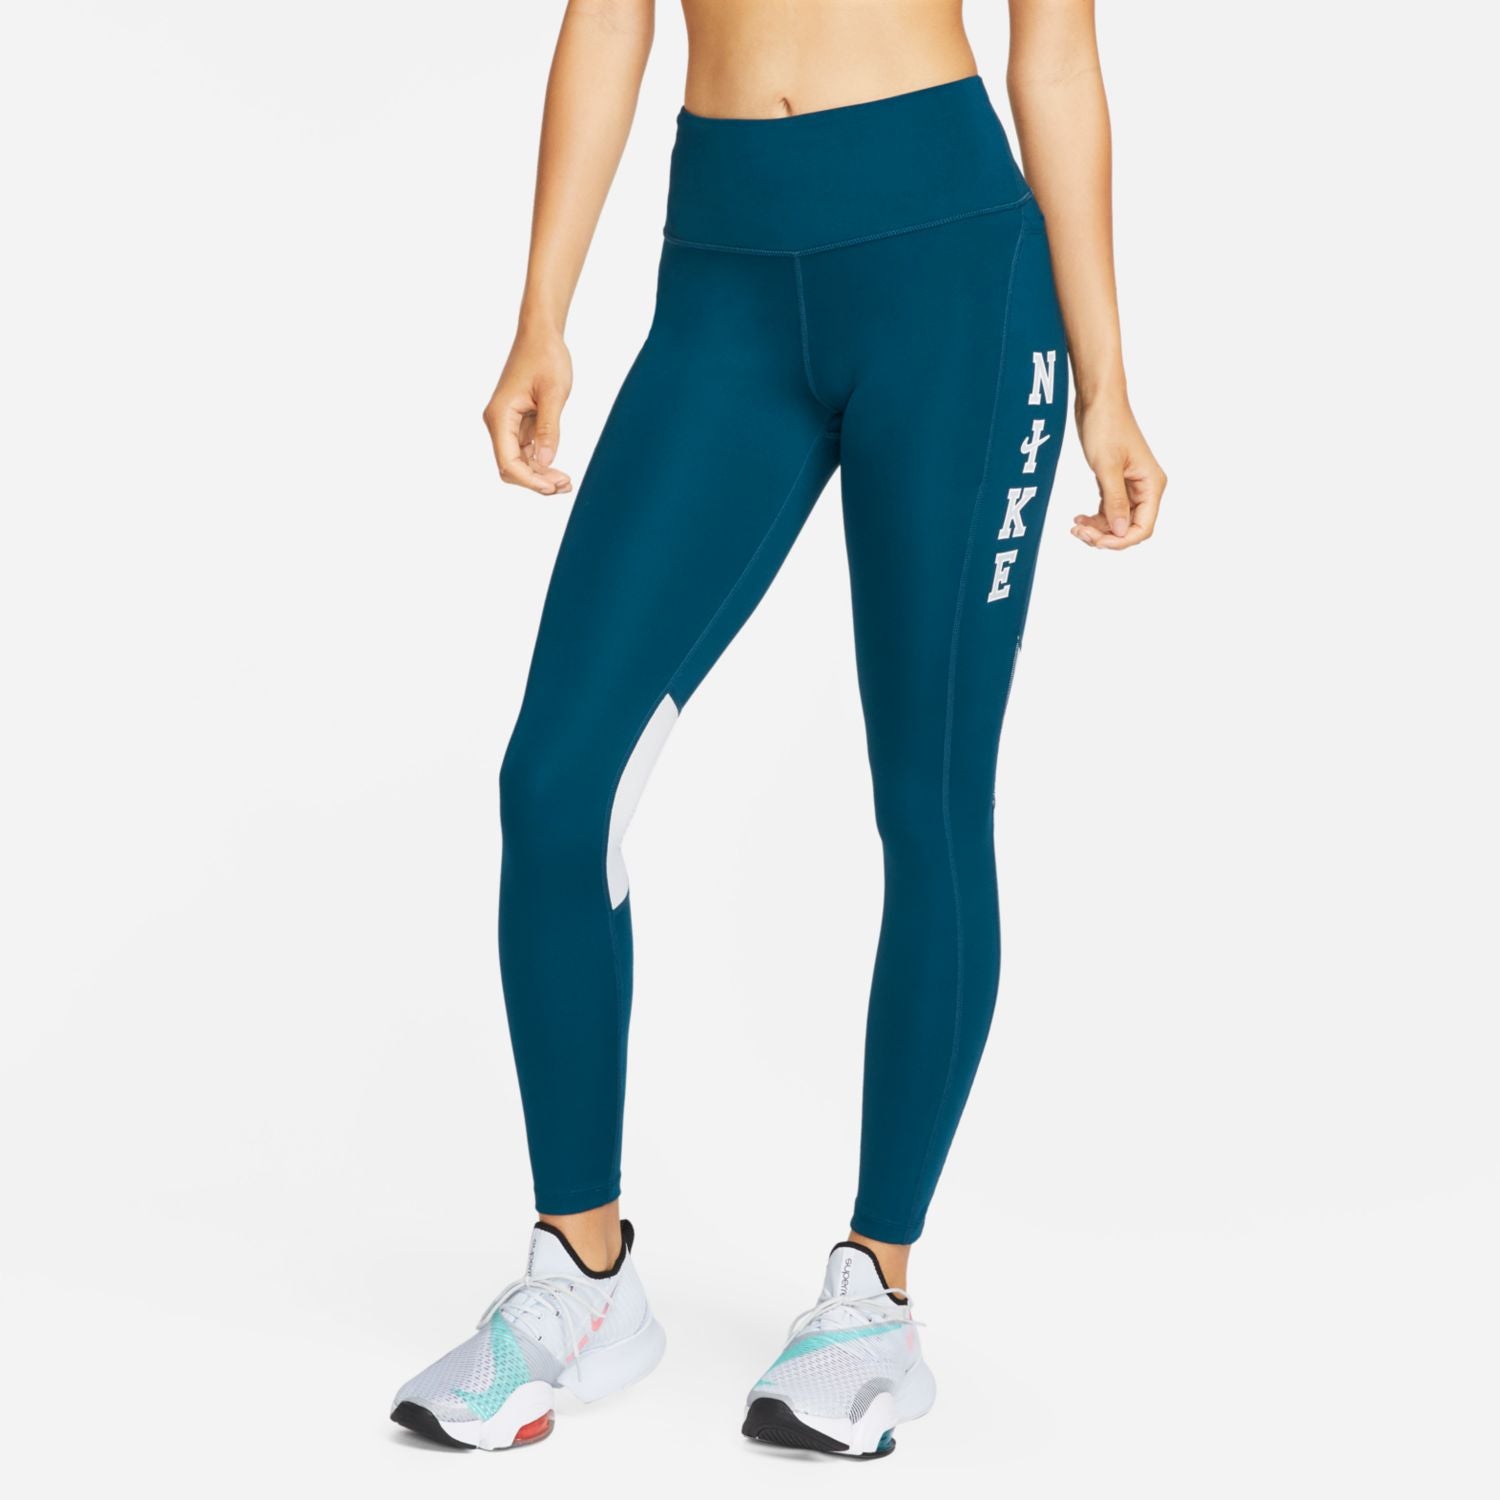 Nike Women's Fast Running Navy Tights Small AT3103-010 WP-387 for